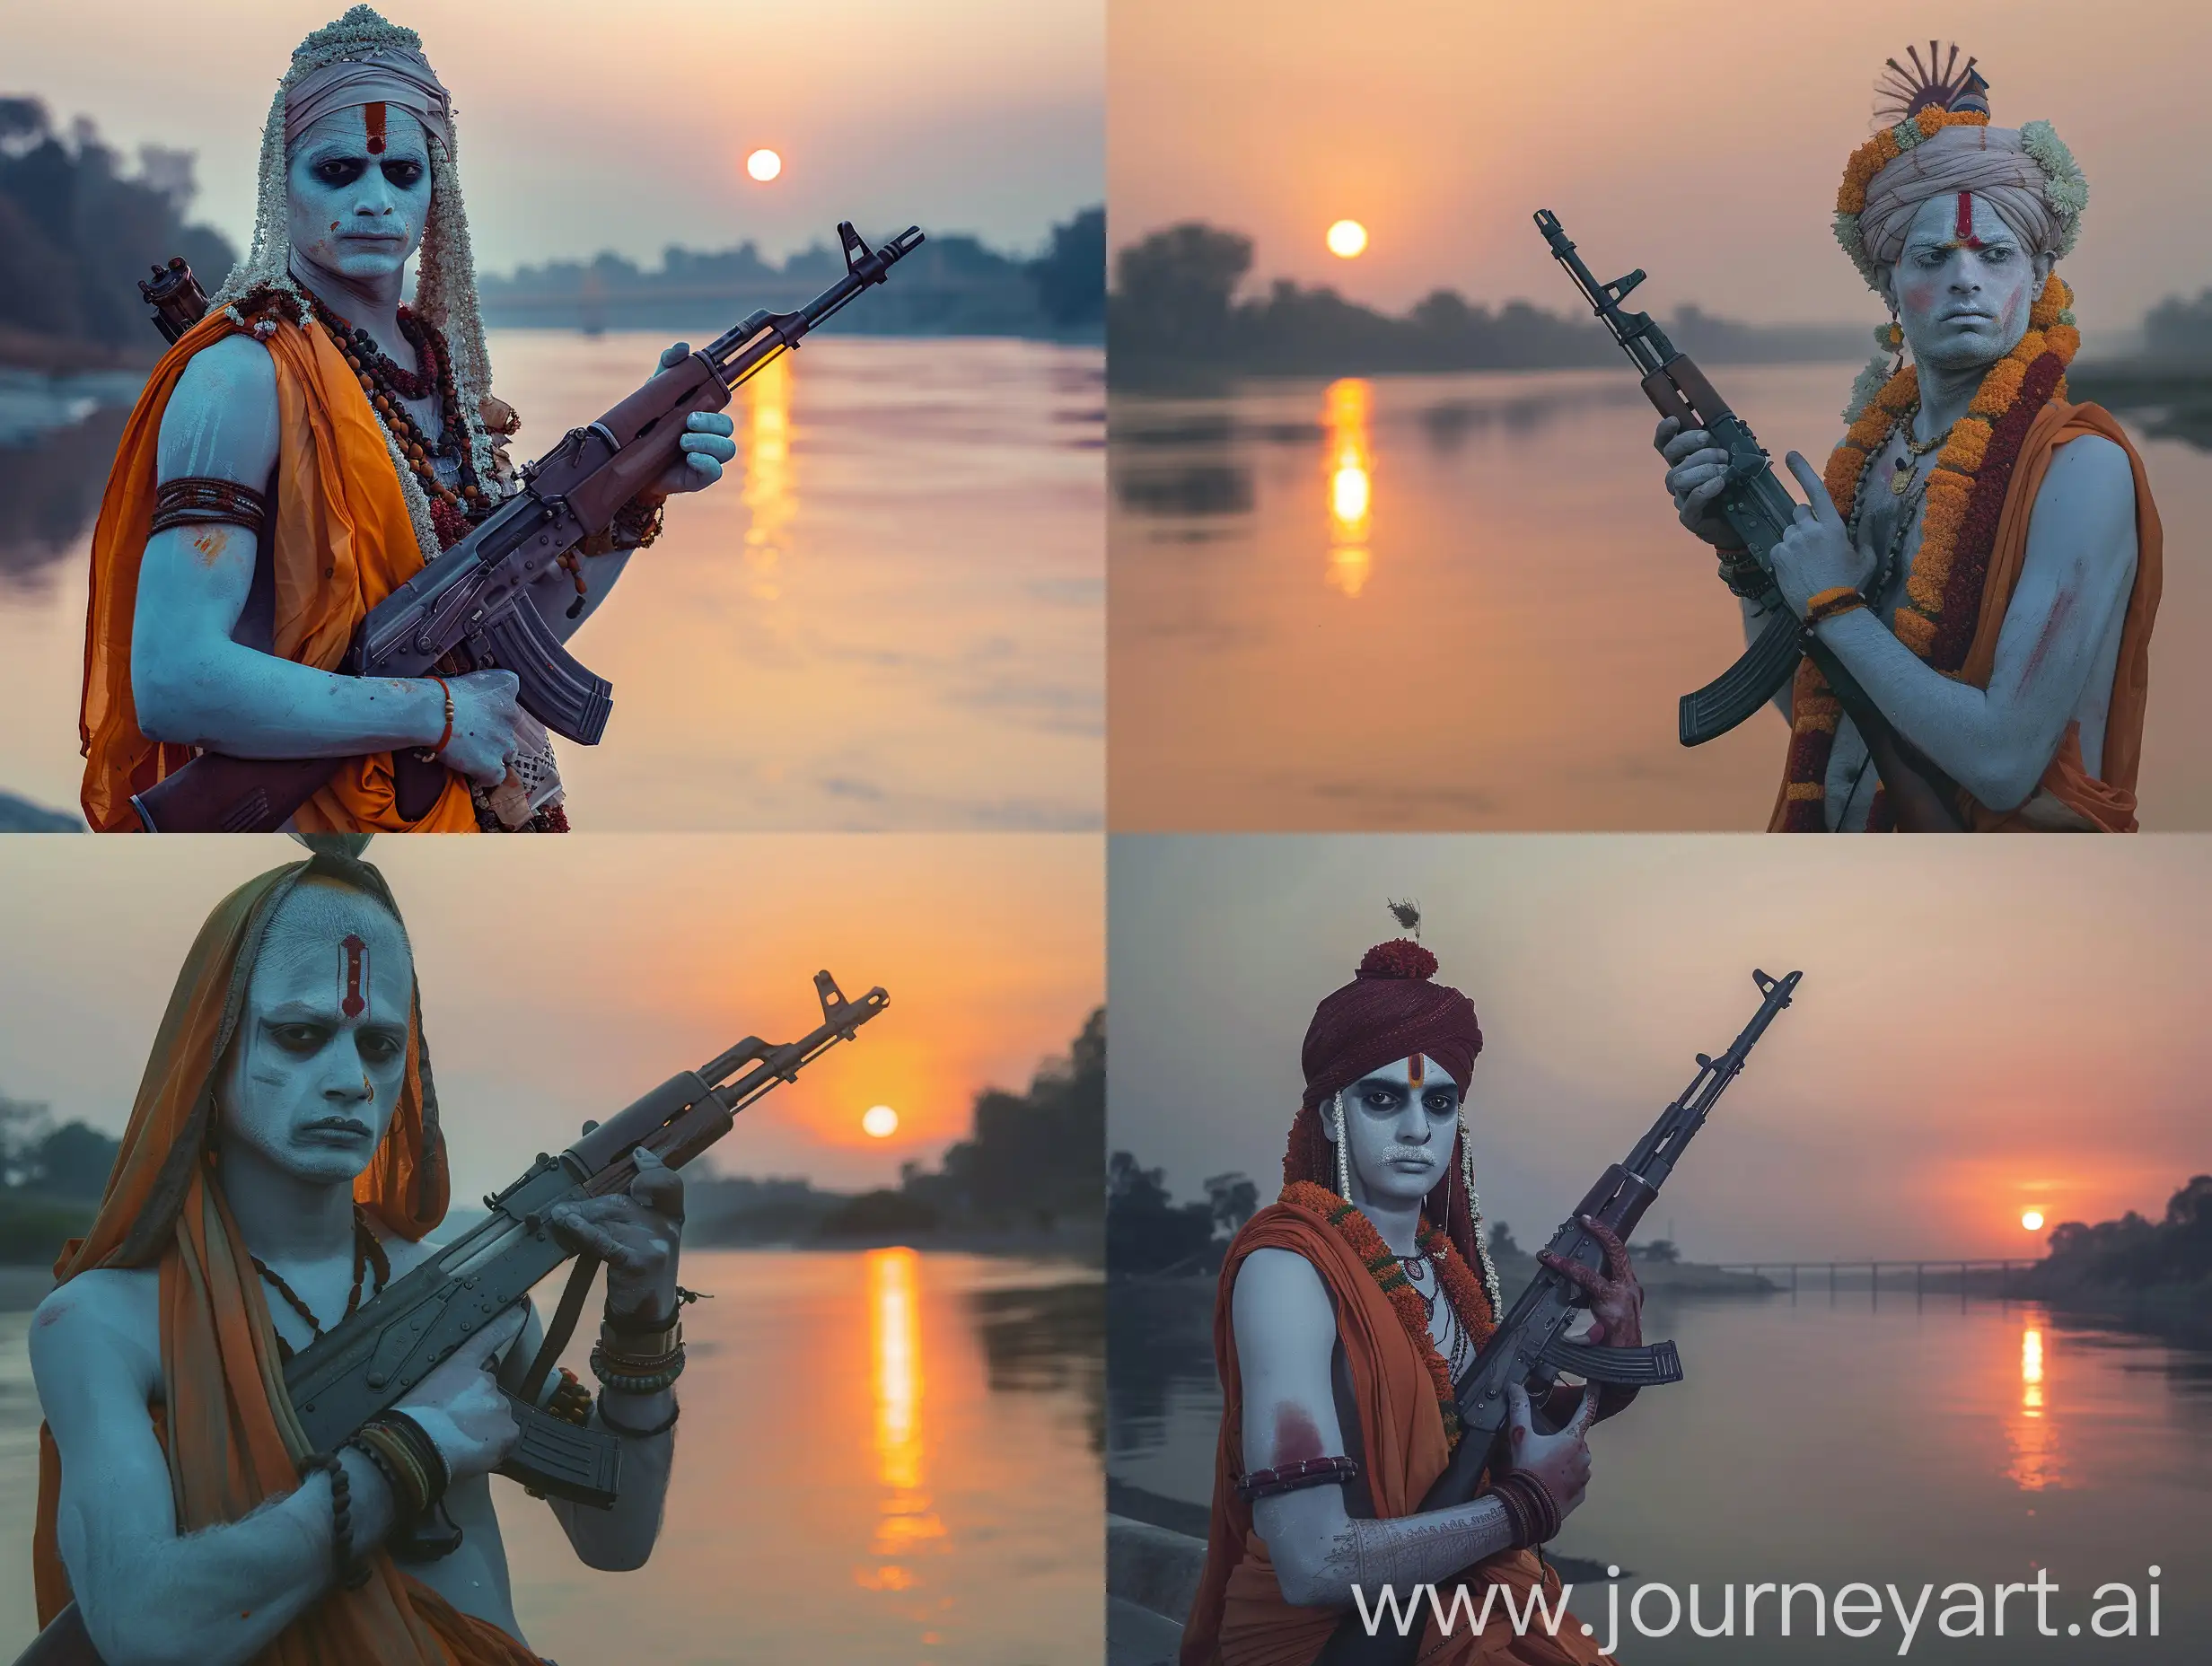 "Capture the essence of a young, handsome, white-skinned Brahmin priest with an AK-47 by the river at sunrise, showcasing the intriguing blend of tradition and modernity."